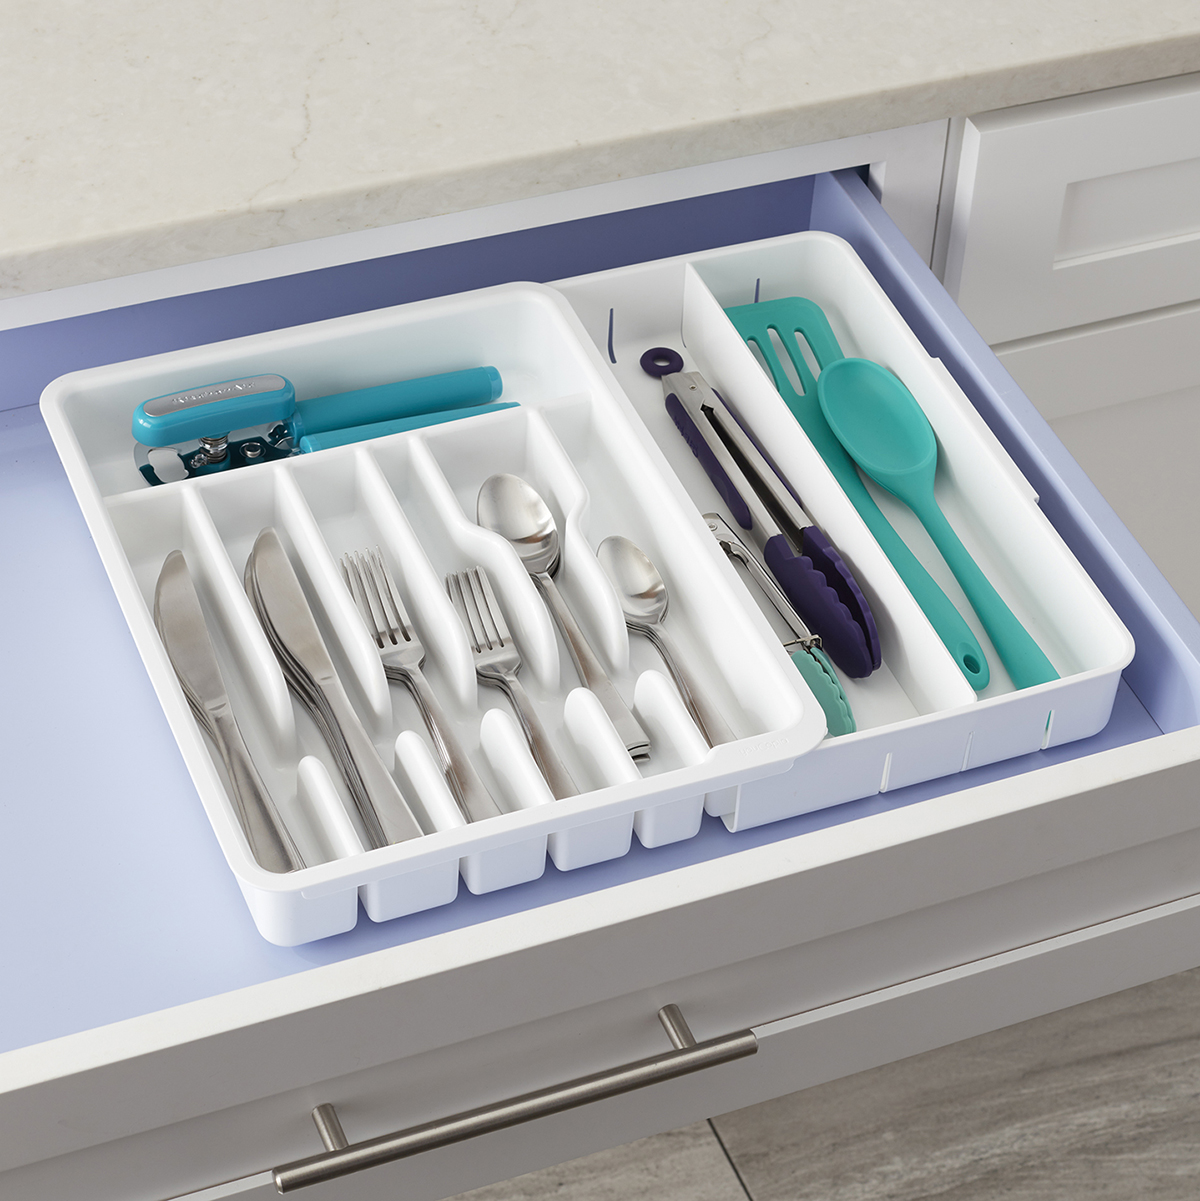 https://www.containerstore.com/catalogimages/393905/10082705-DrawerFit-Expandable%20Utensi.jpg